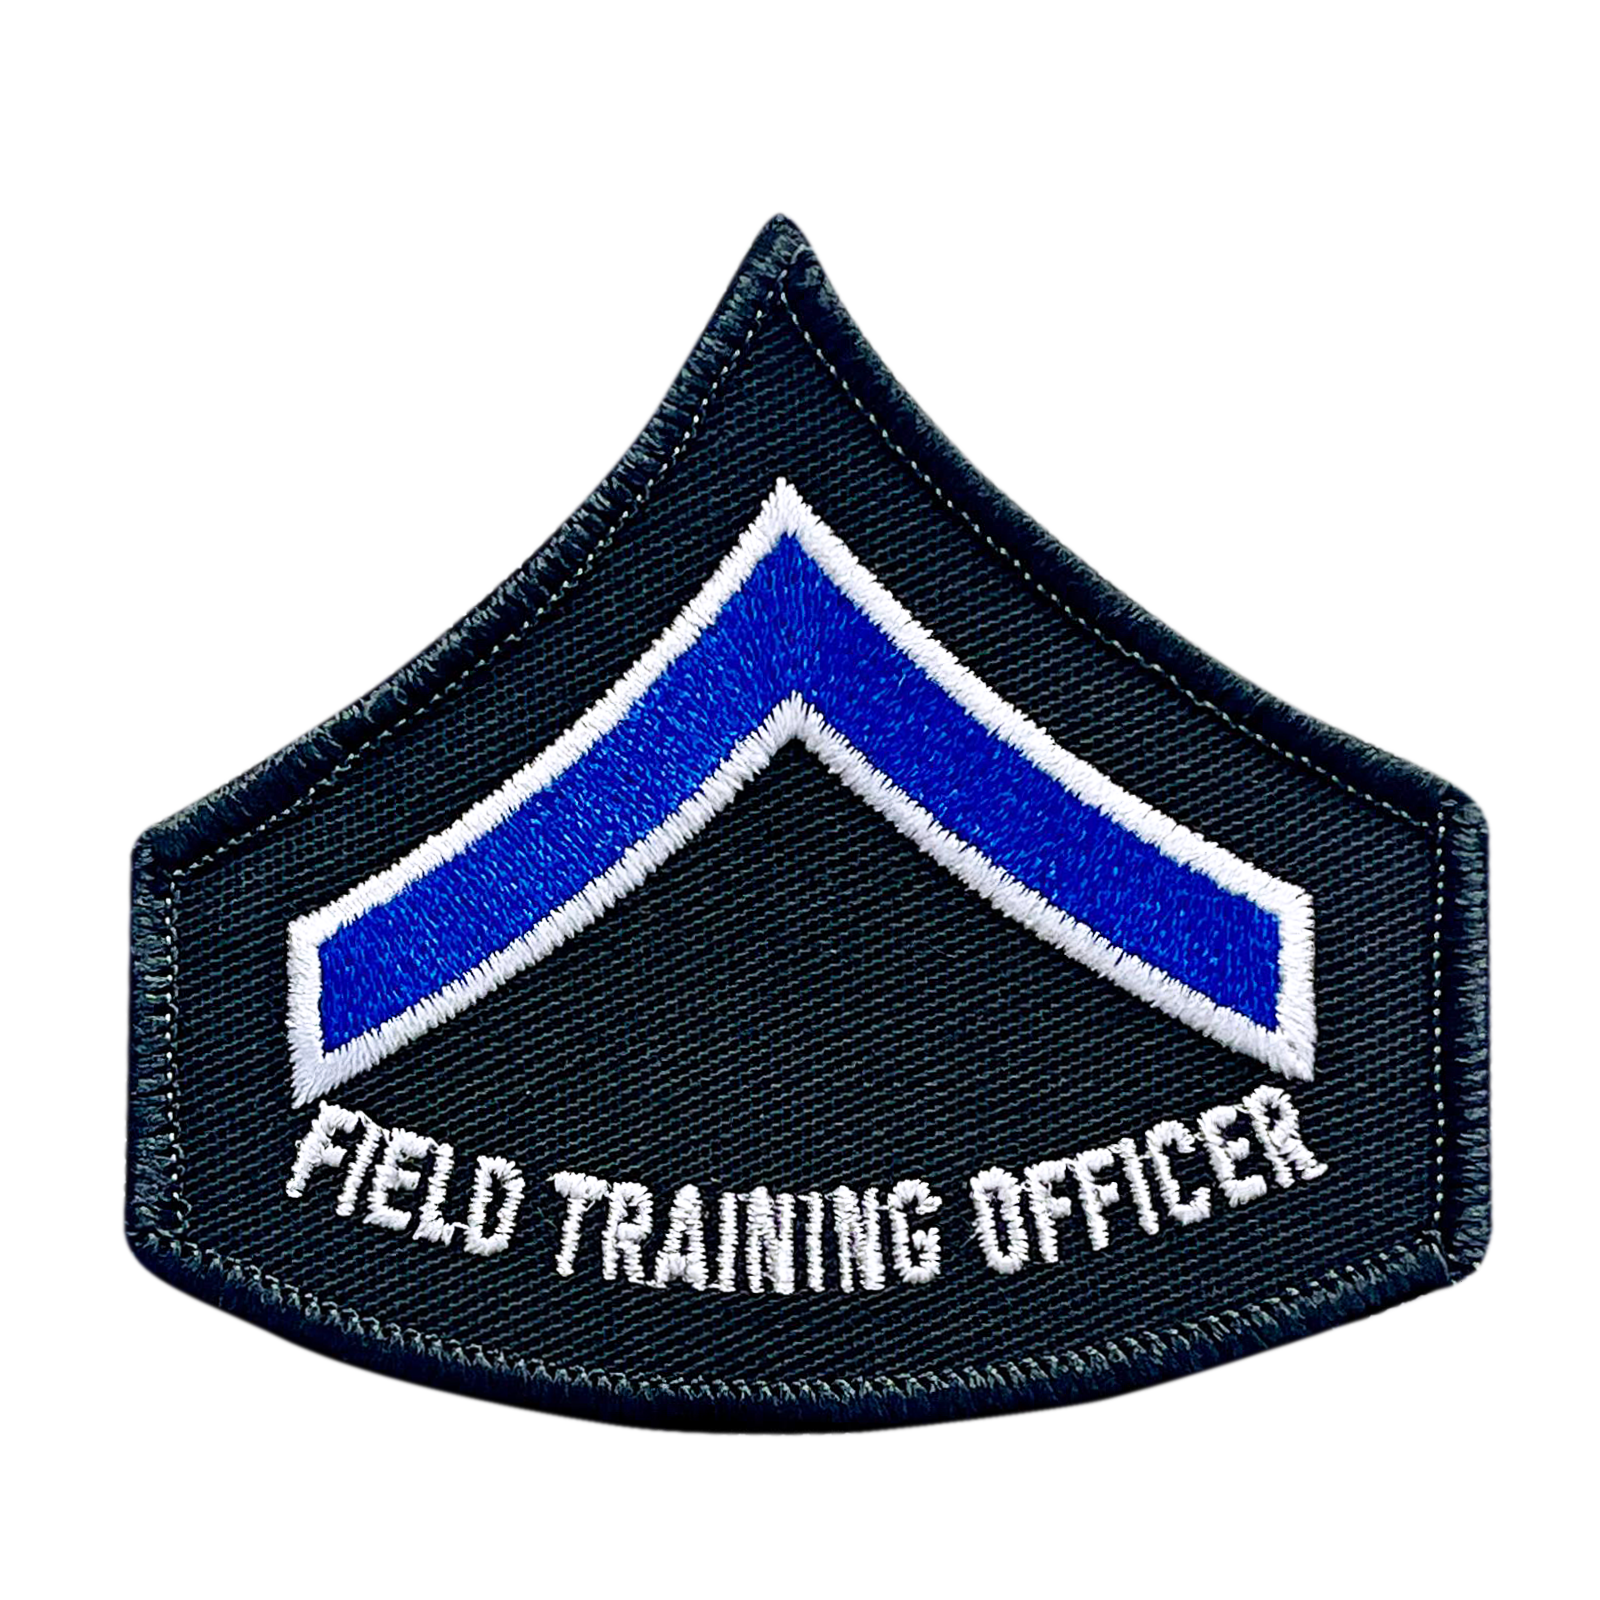 A patch that says field training officer on it